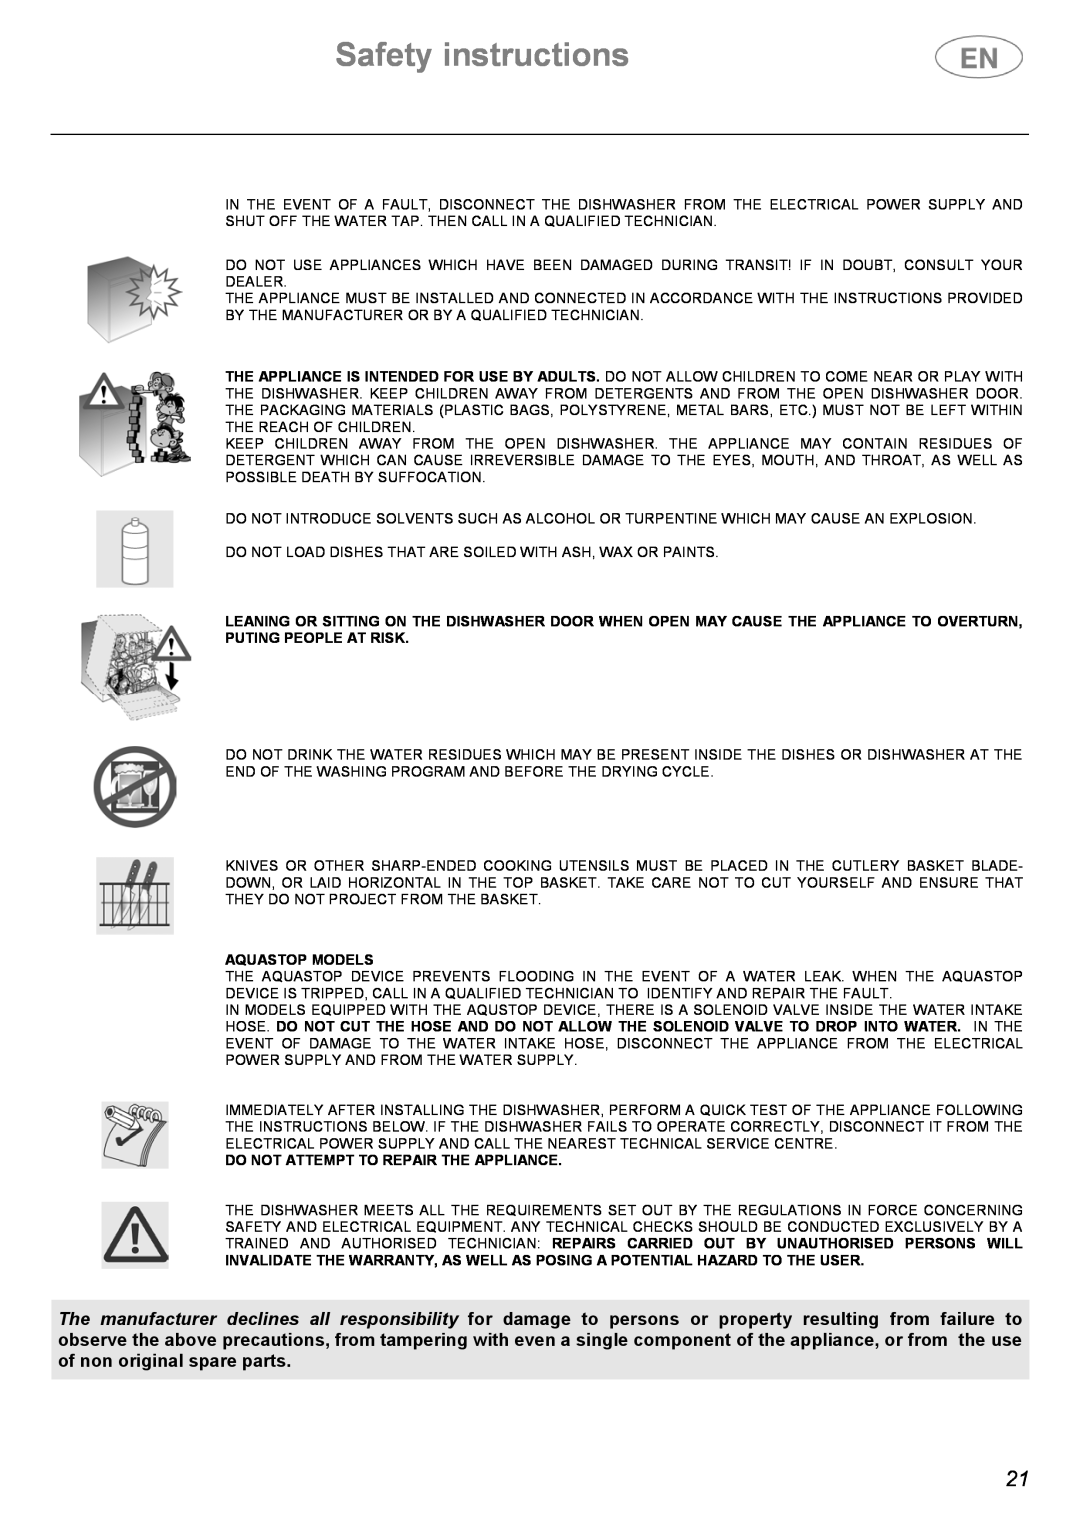 Smeg ST1107S, ST1105 instruction manual Safety instructions, Aquastop Models, Do Not Attempt To Repair The Appliance 